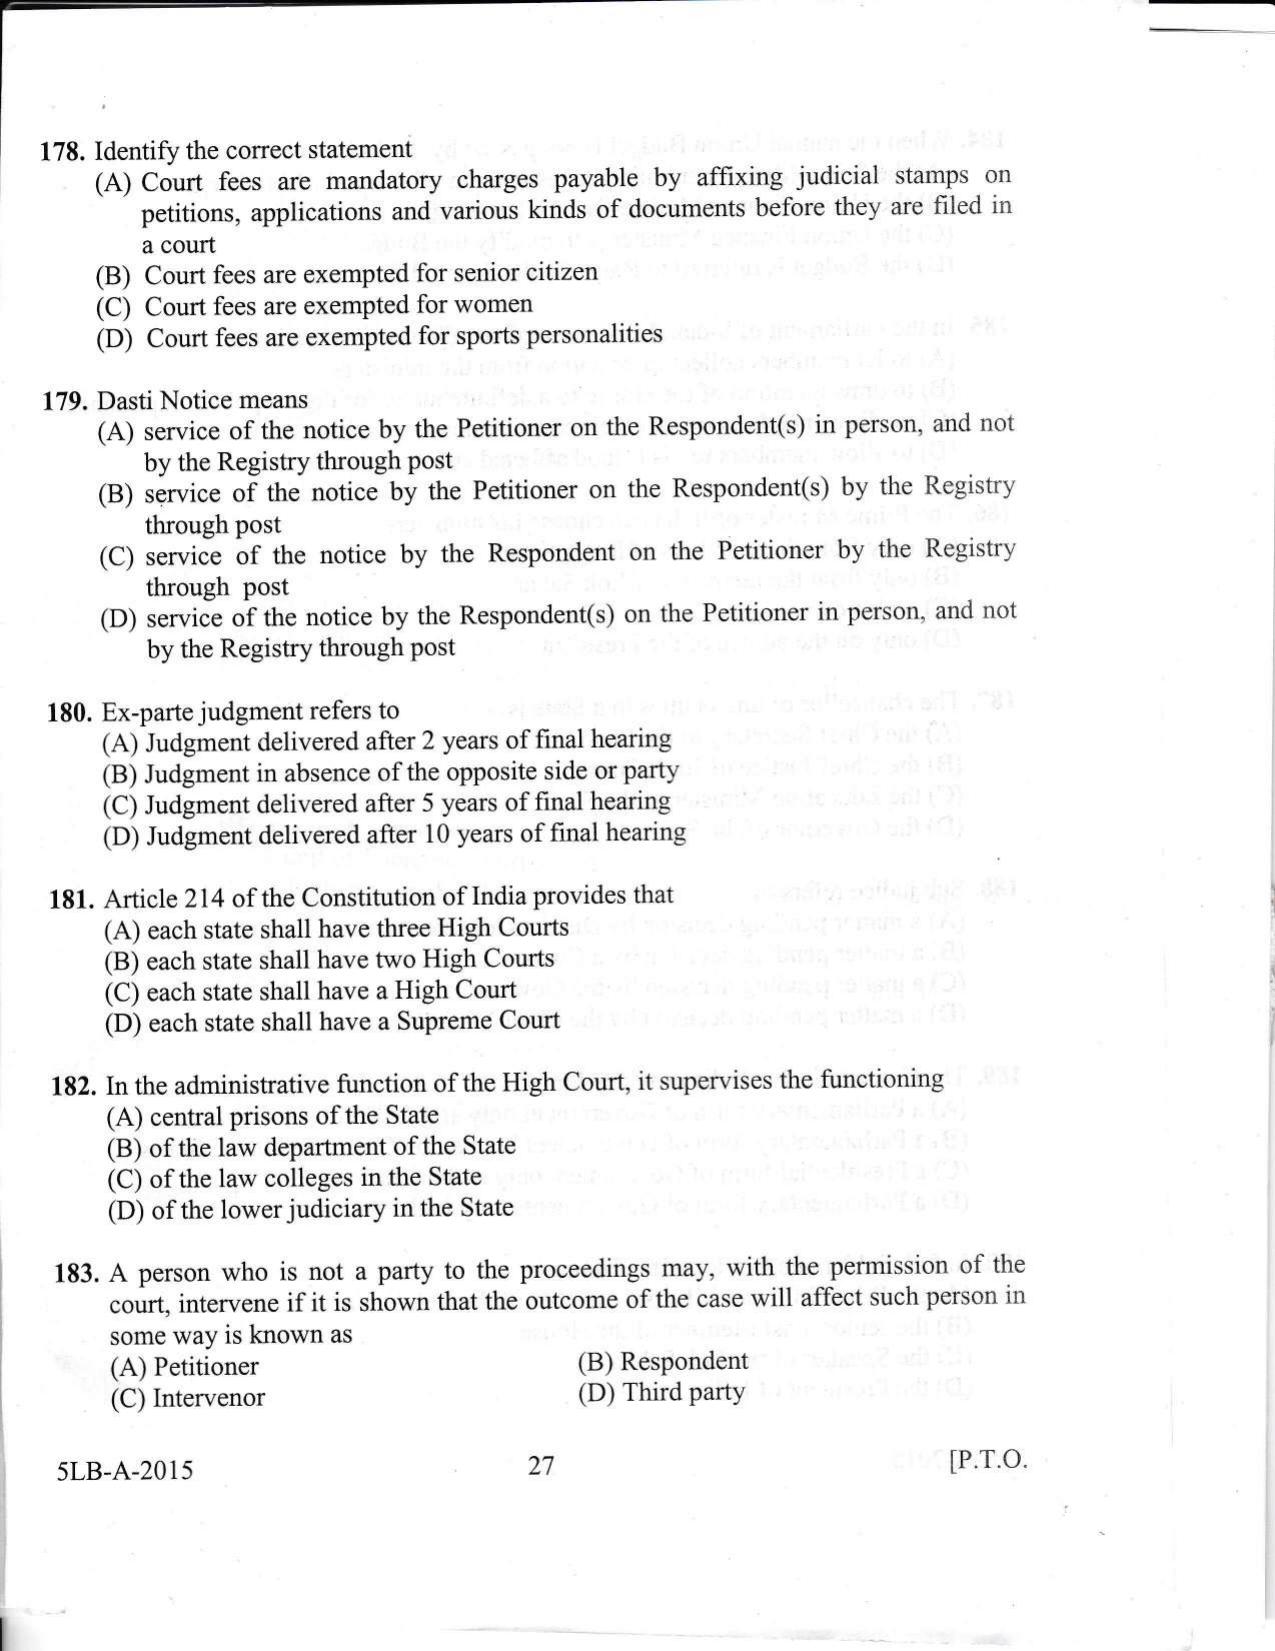 KLEE 5 Year LLB Exam 2015 Question Paper - Page 27